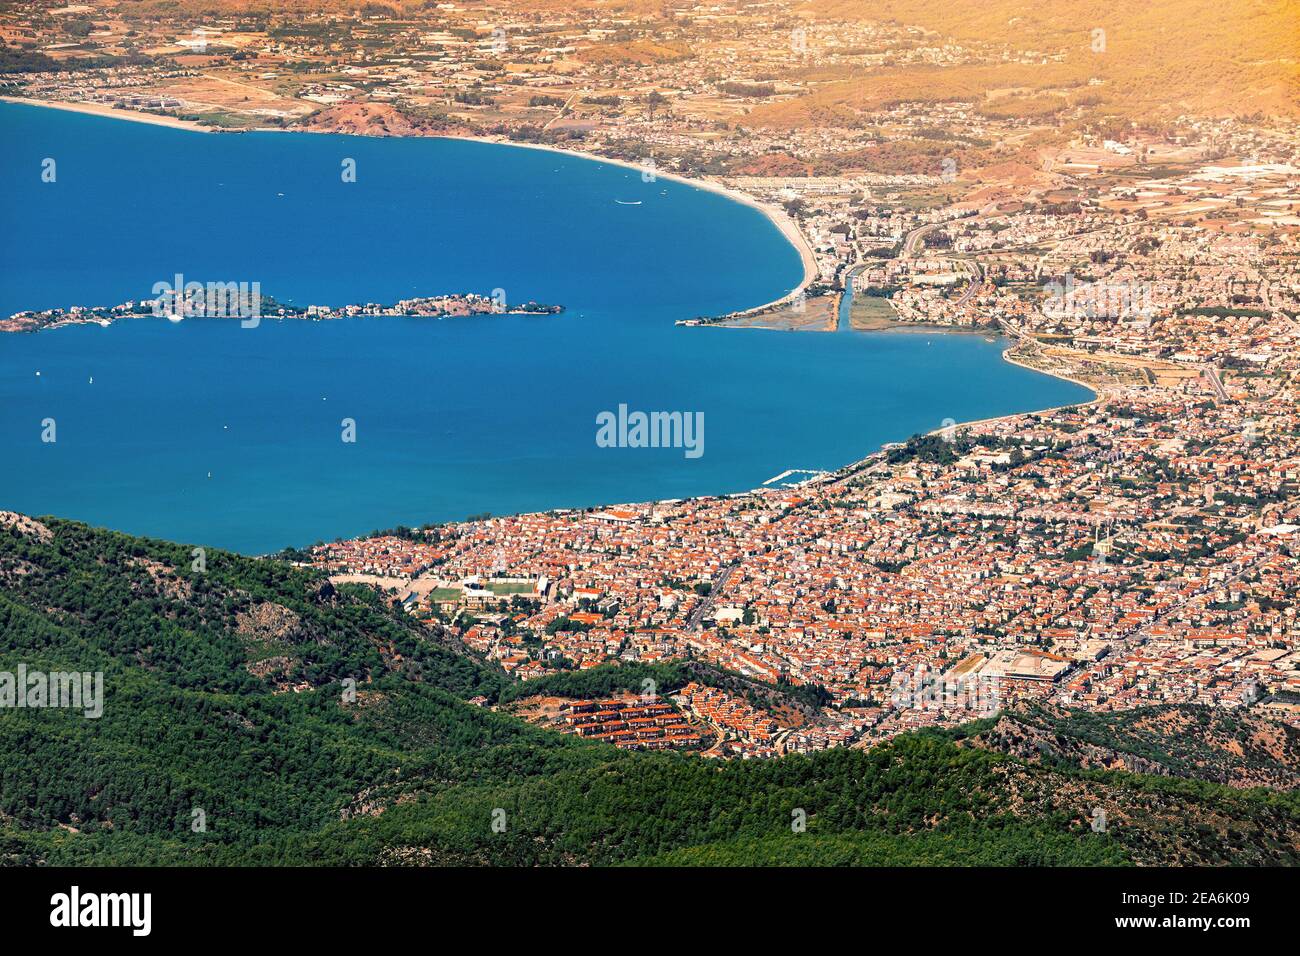 Aerial distant view of Fethiye resort town with red roofs and gocek bay coastline. Mediterranean cities concept Stock Photo